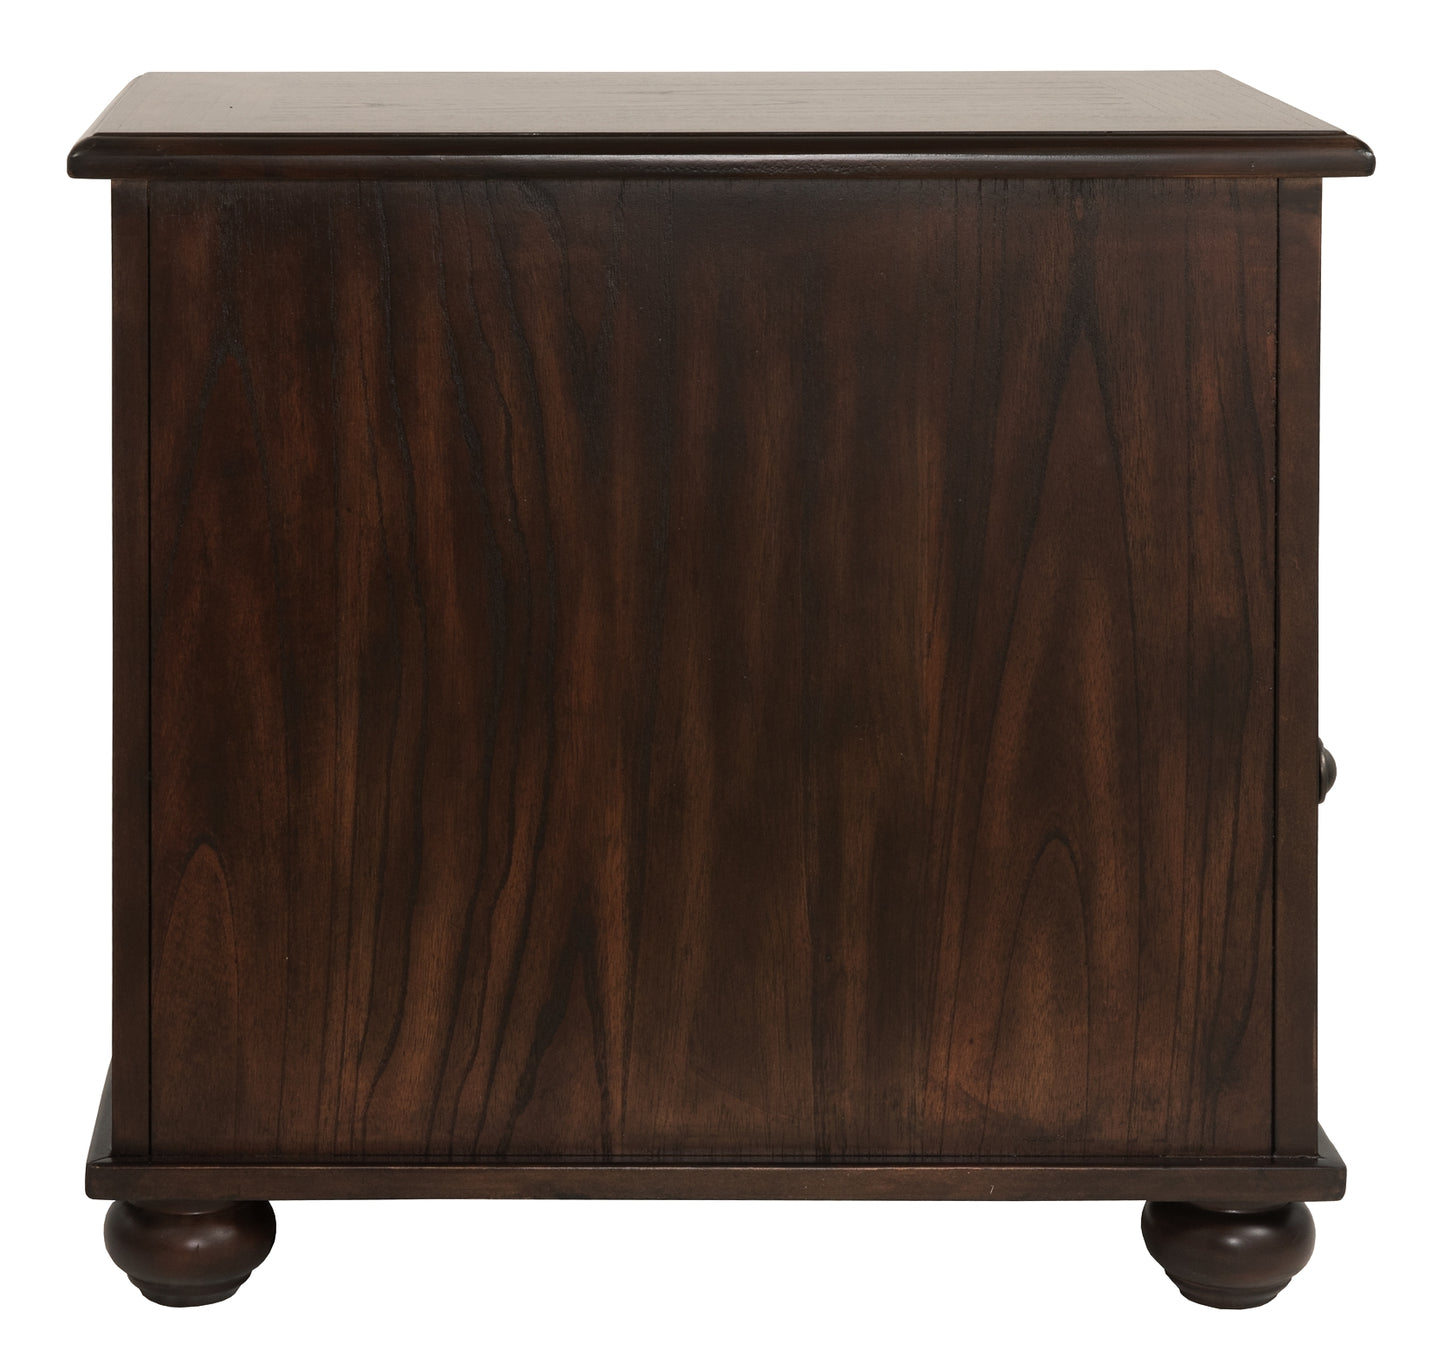 Ashley Express - Barilanni Chair Side End Table Wilson Furniture (OH)  in Bridgeport, Ohio. Serving Bridgeport, Yorkville, Bellaire, & Avondale